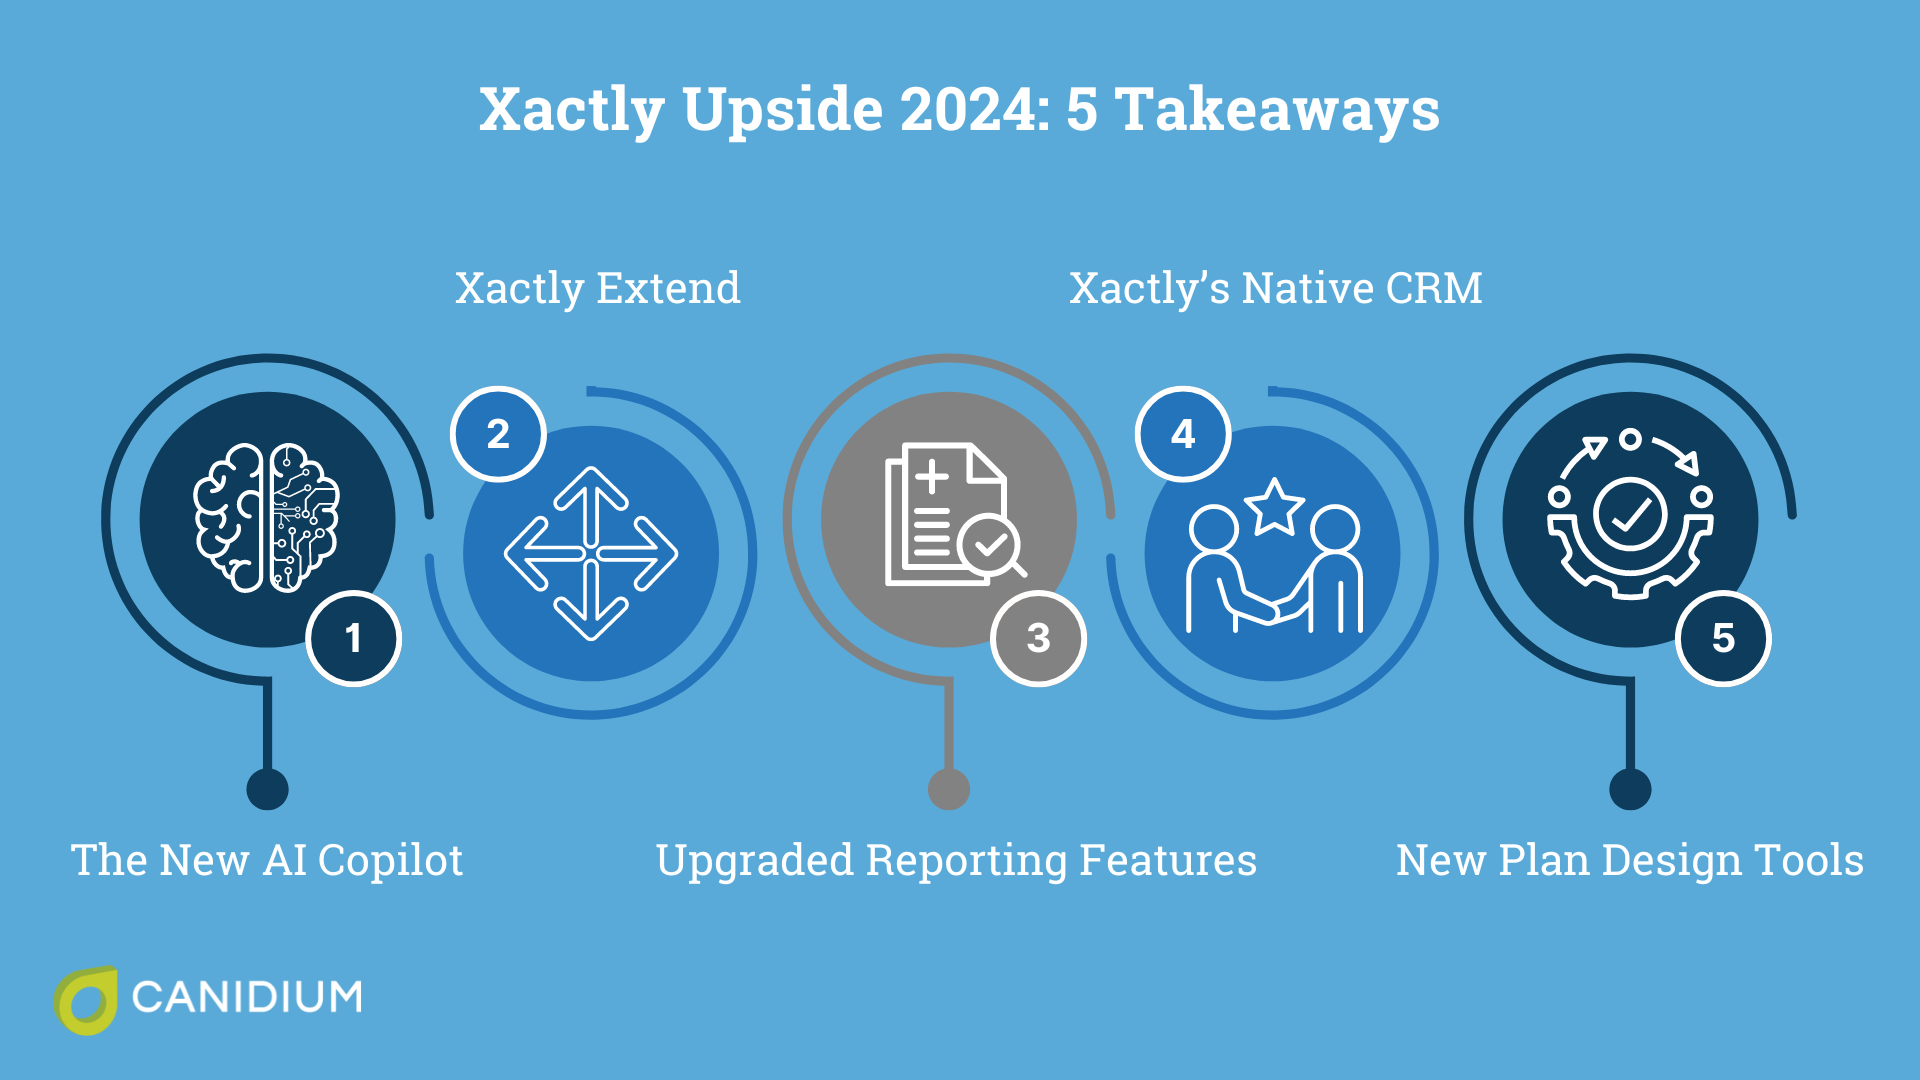 Xactly Upside 2024 5 Takeaways and New Ways to Use Incentive Compensation Management Software